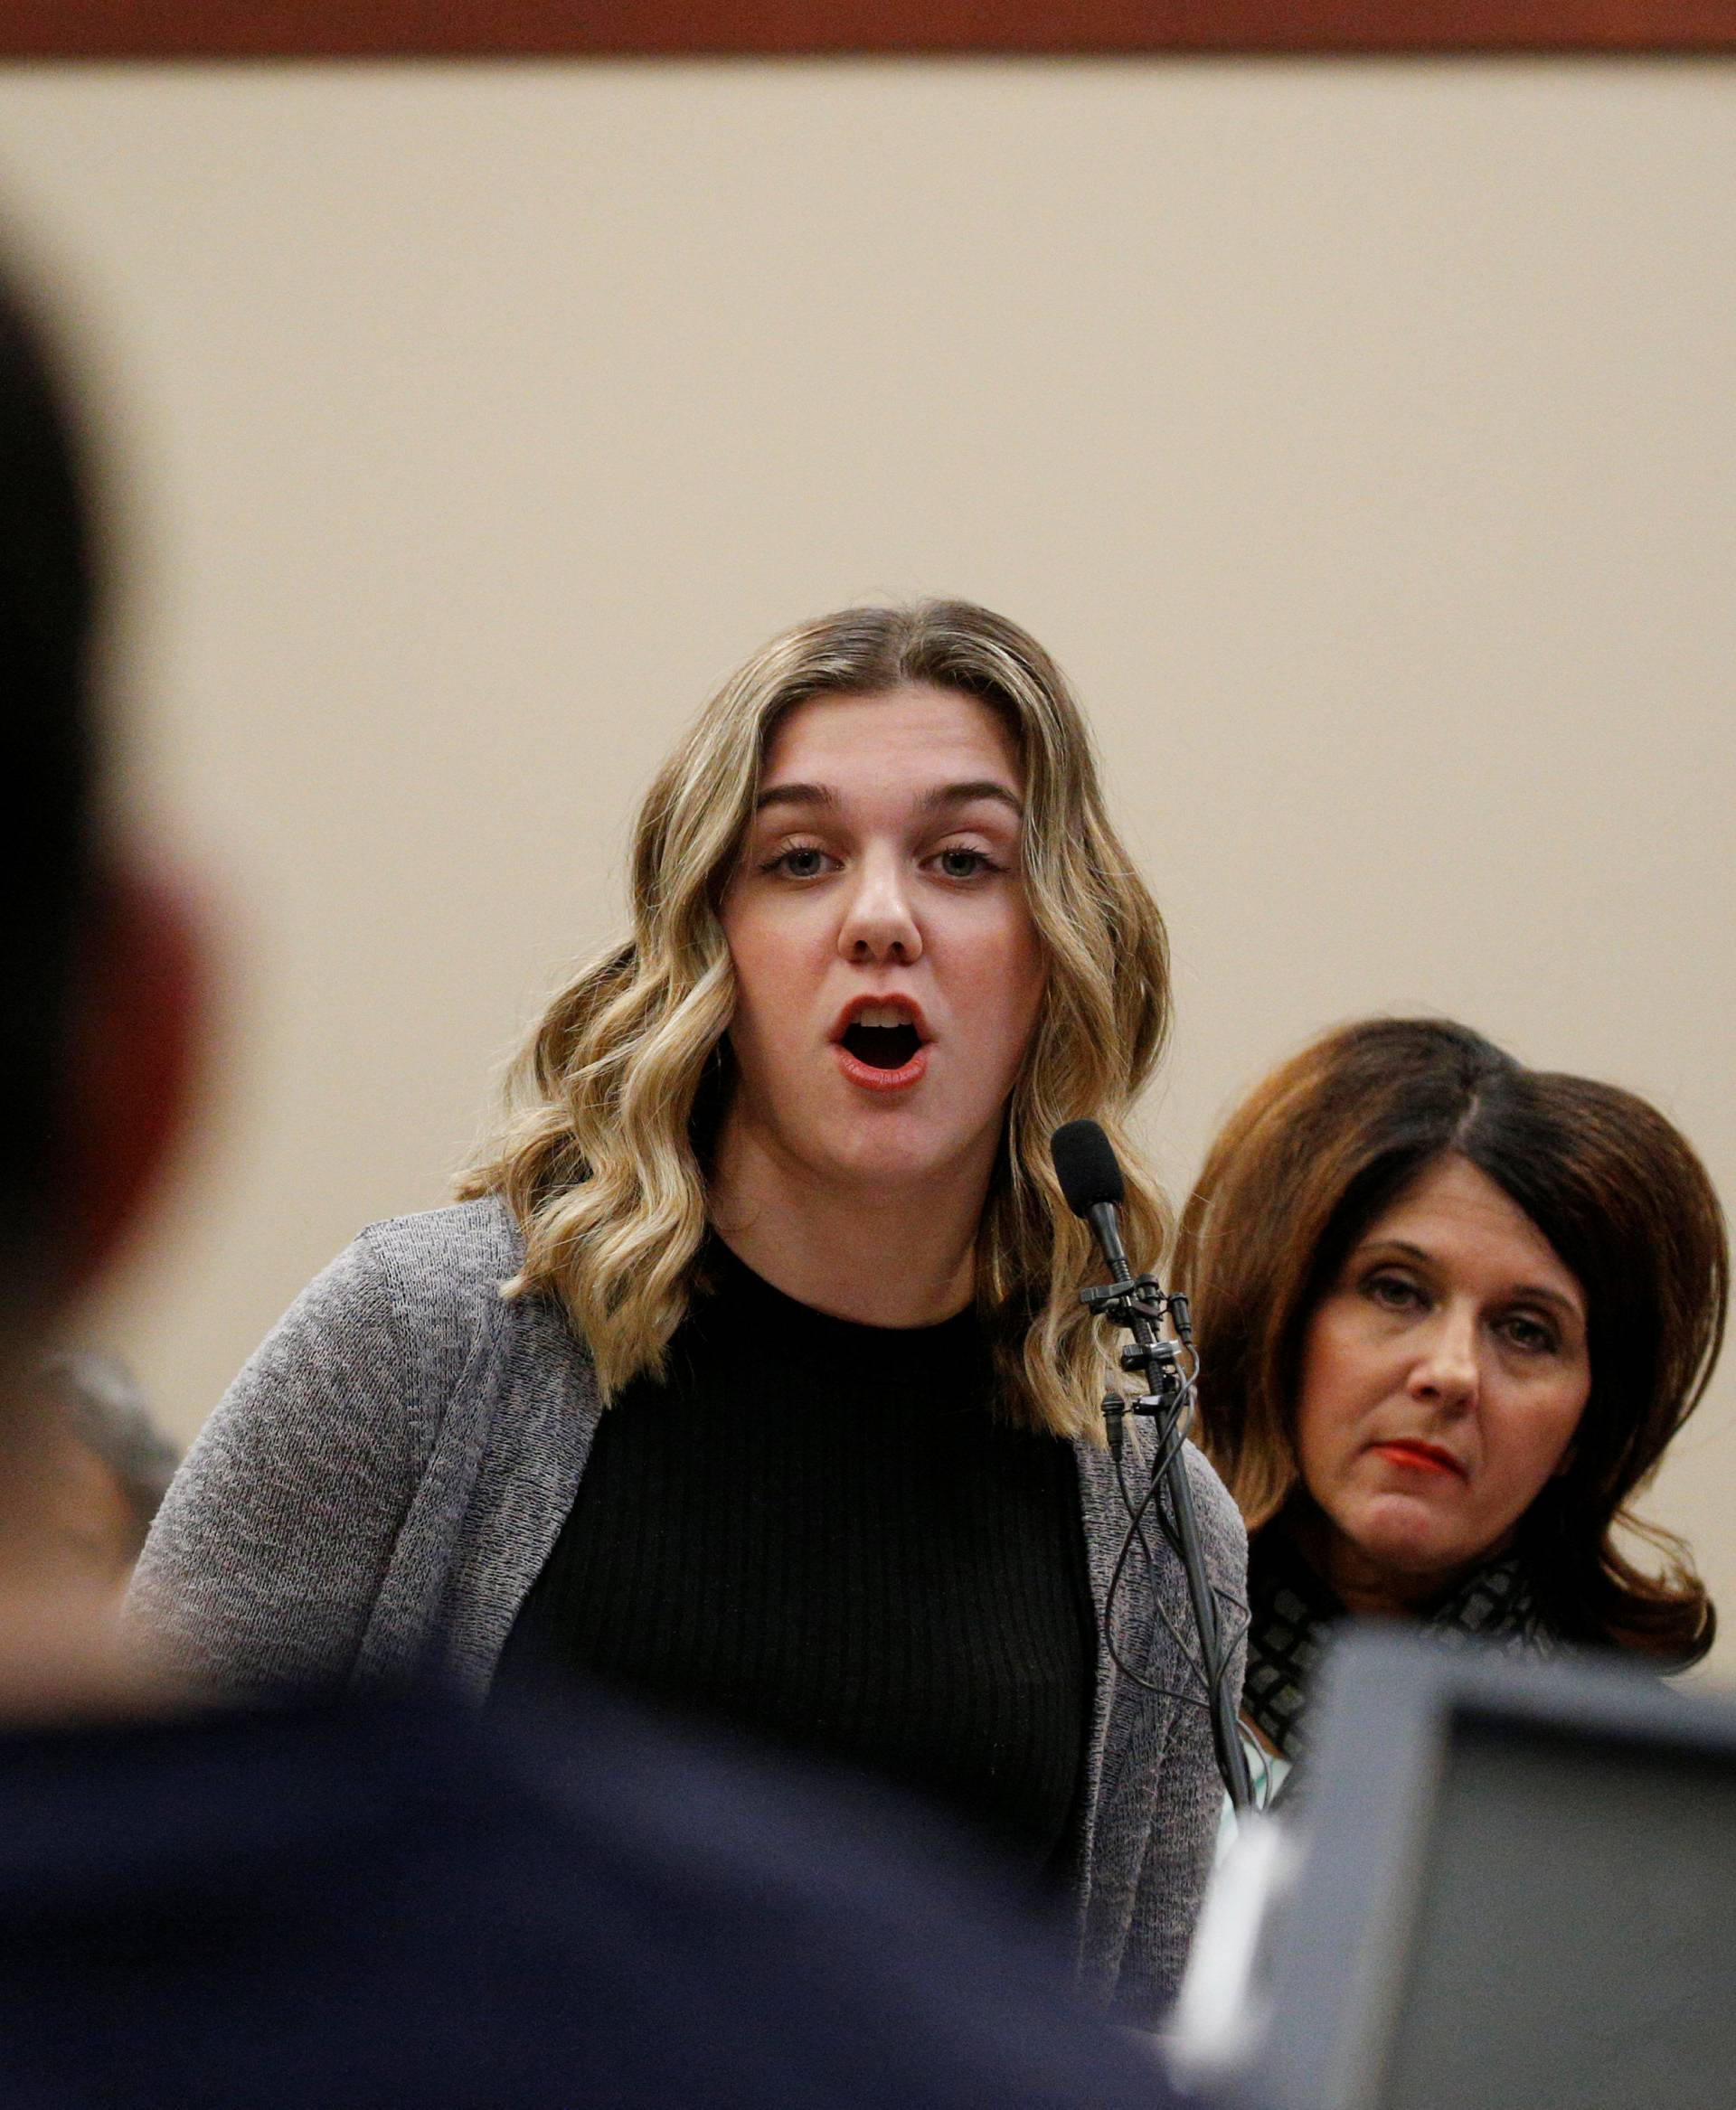 Victim Hannah Morrow speaks at the sentencing hearing for Larry Nassar, a former team USA Gymnastics doctor who pleaded guilty in November 2017 to sexual assault charges, in Lansing, Michigan